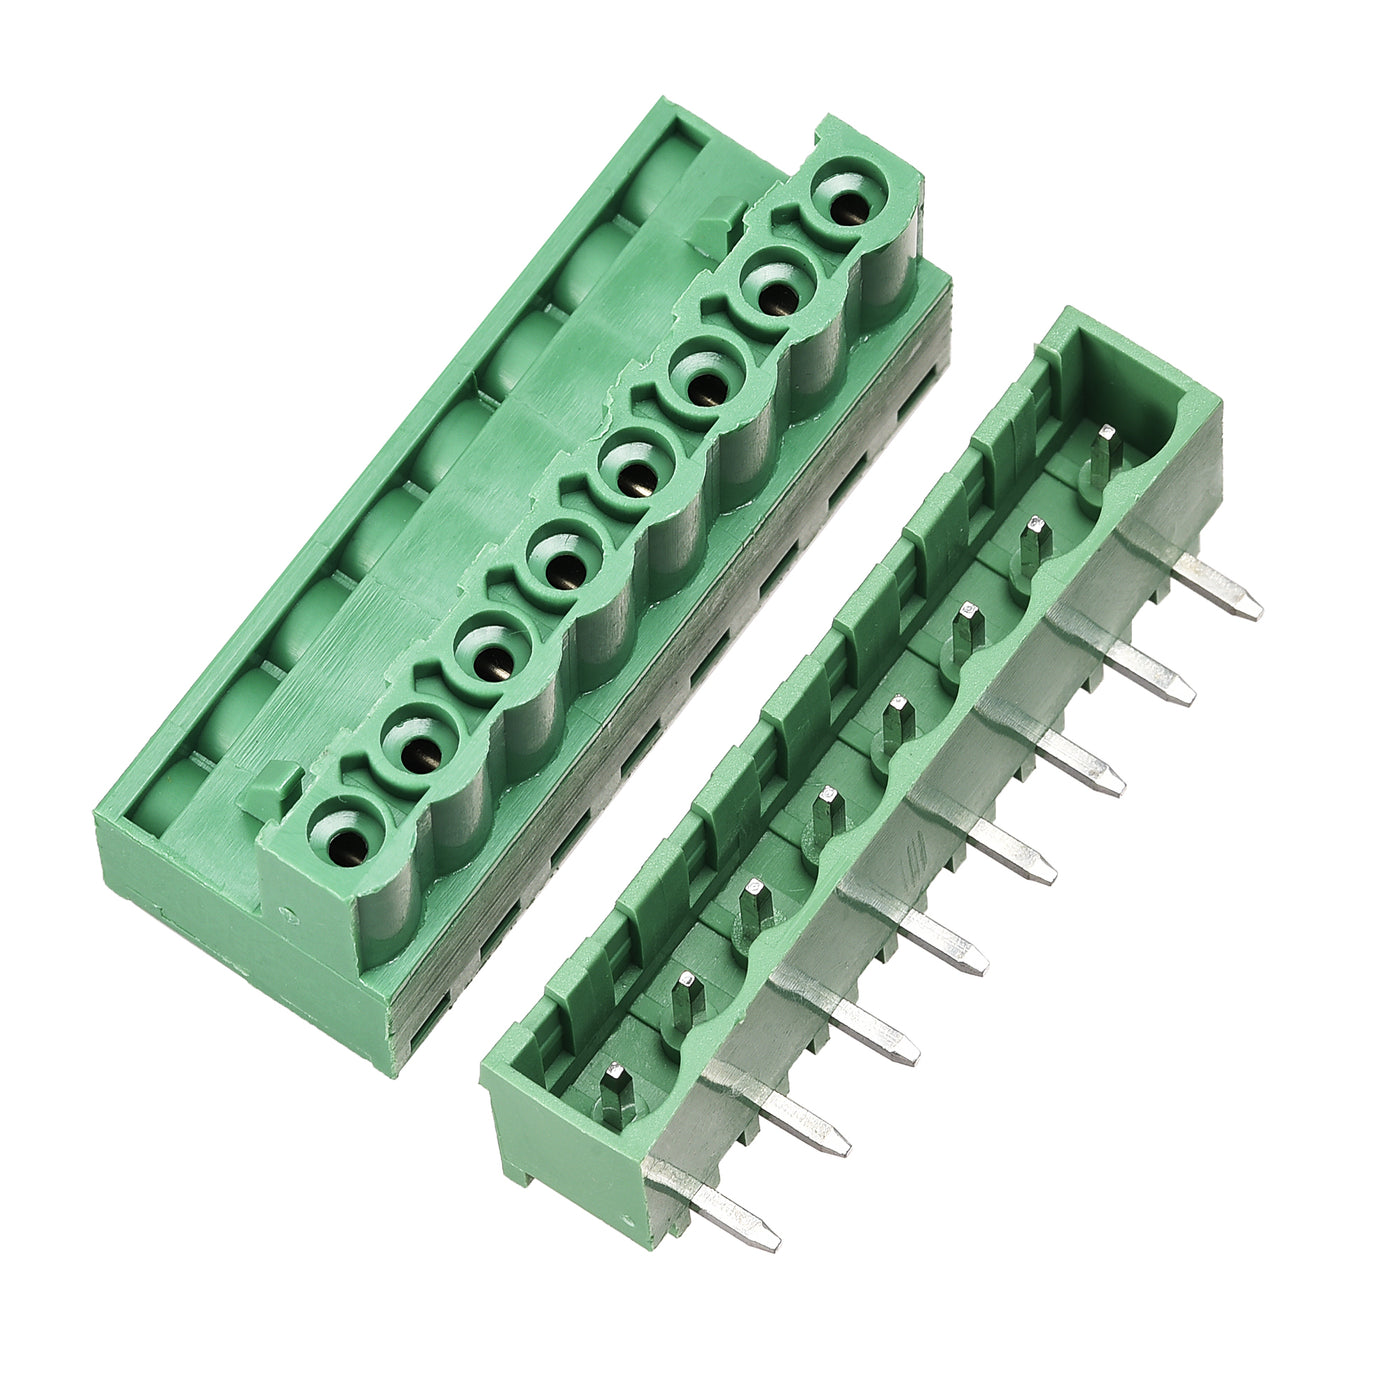 uxcell Uxcell 8-Pin 5.08mm Pitch Right Angle PCB Screw Terminal Block Connector 10 Sets